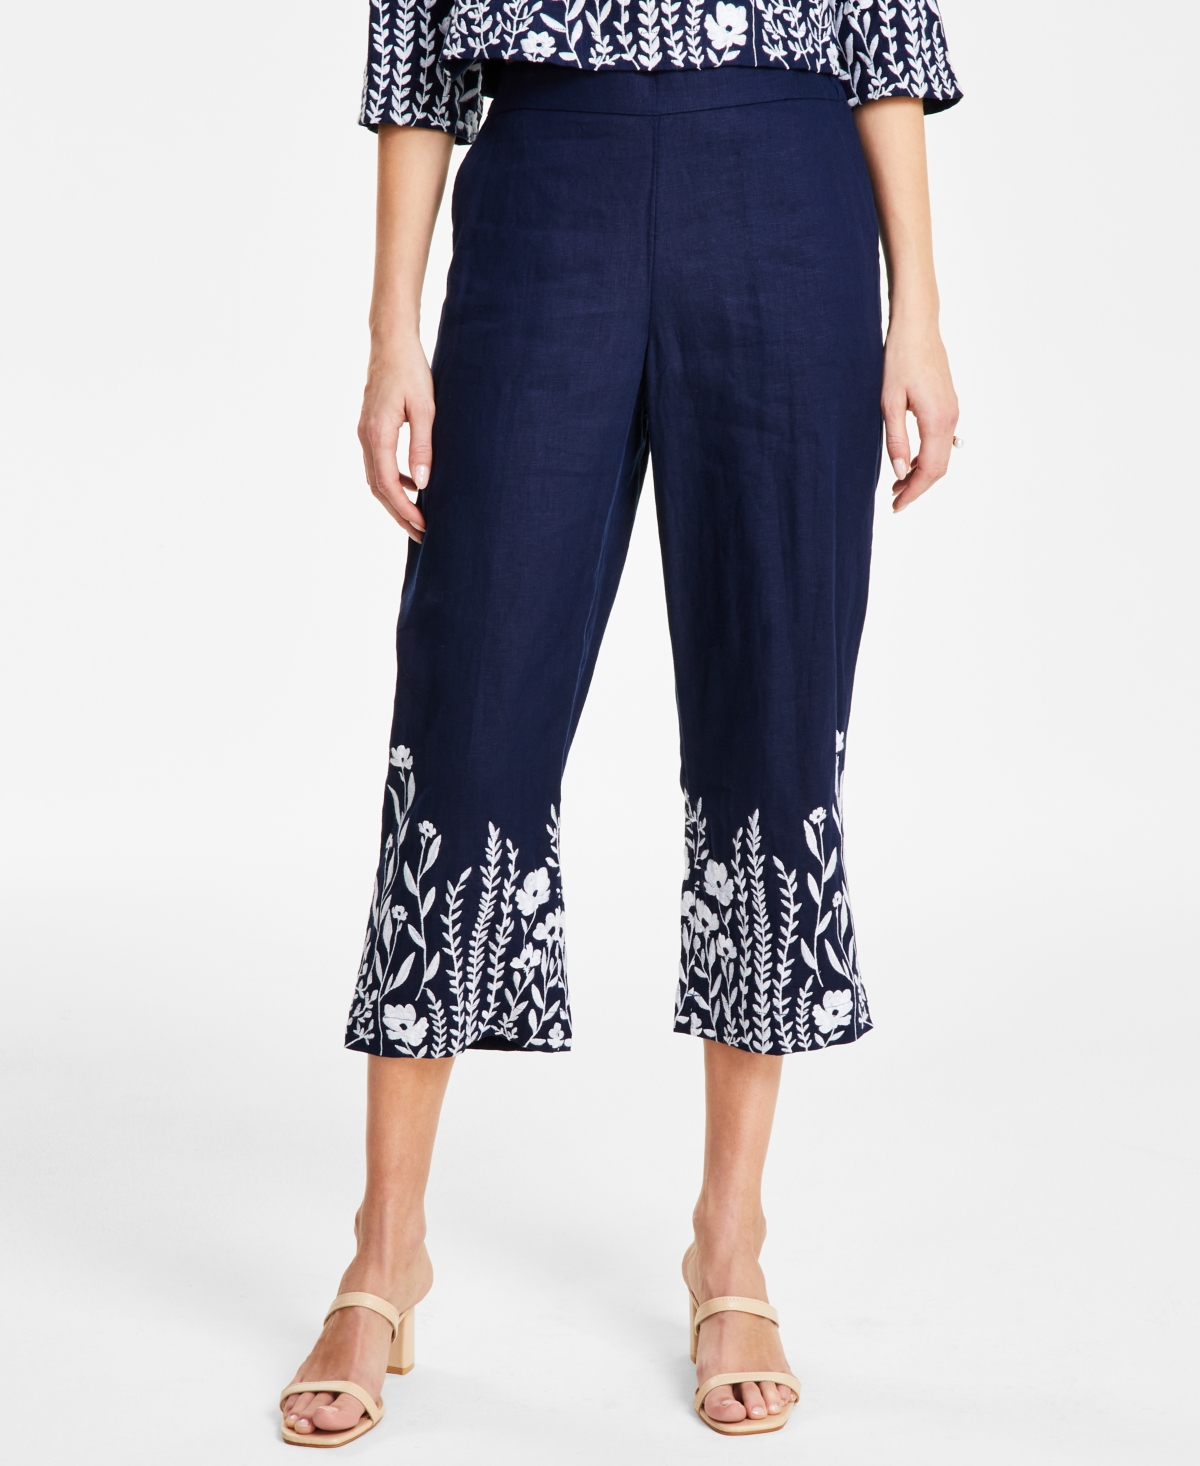 Women's 100% Linen Floral Embroidered High Rise Cropped Pants, Created for Macy's - Intrepid Blue Combo